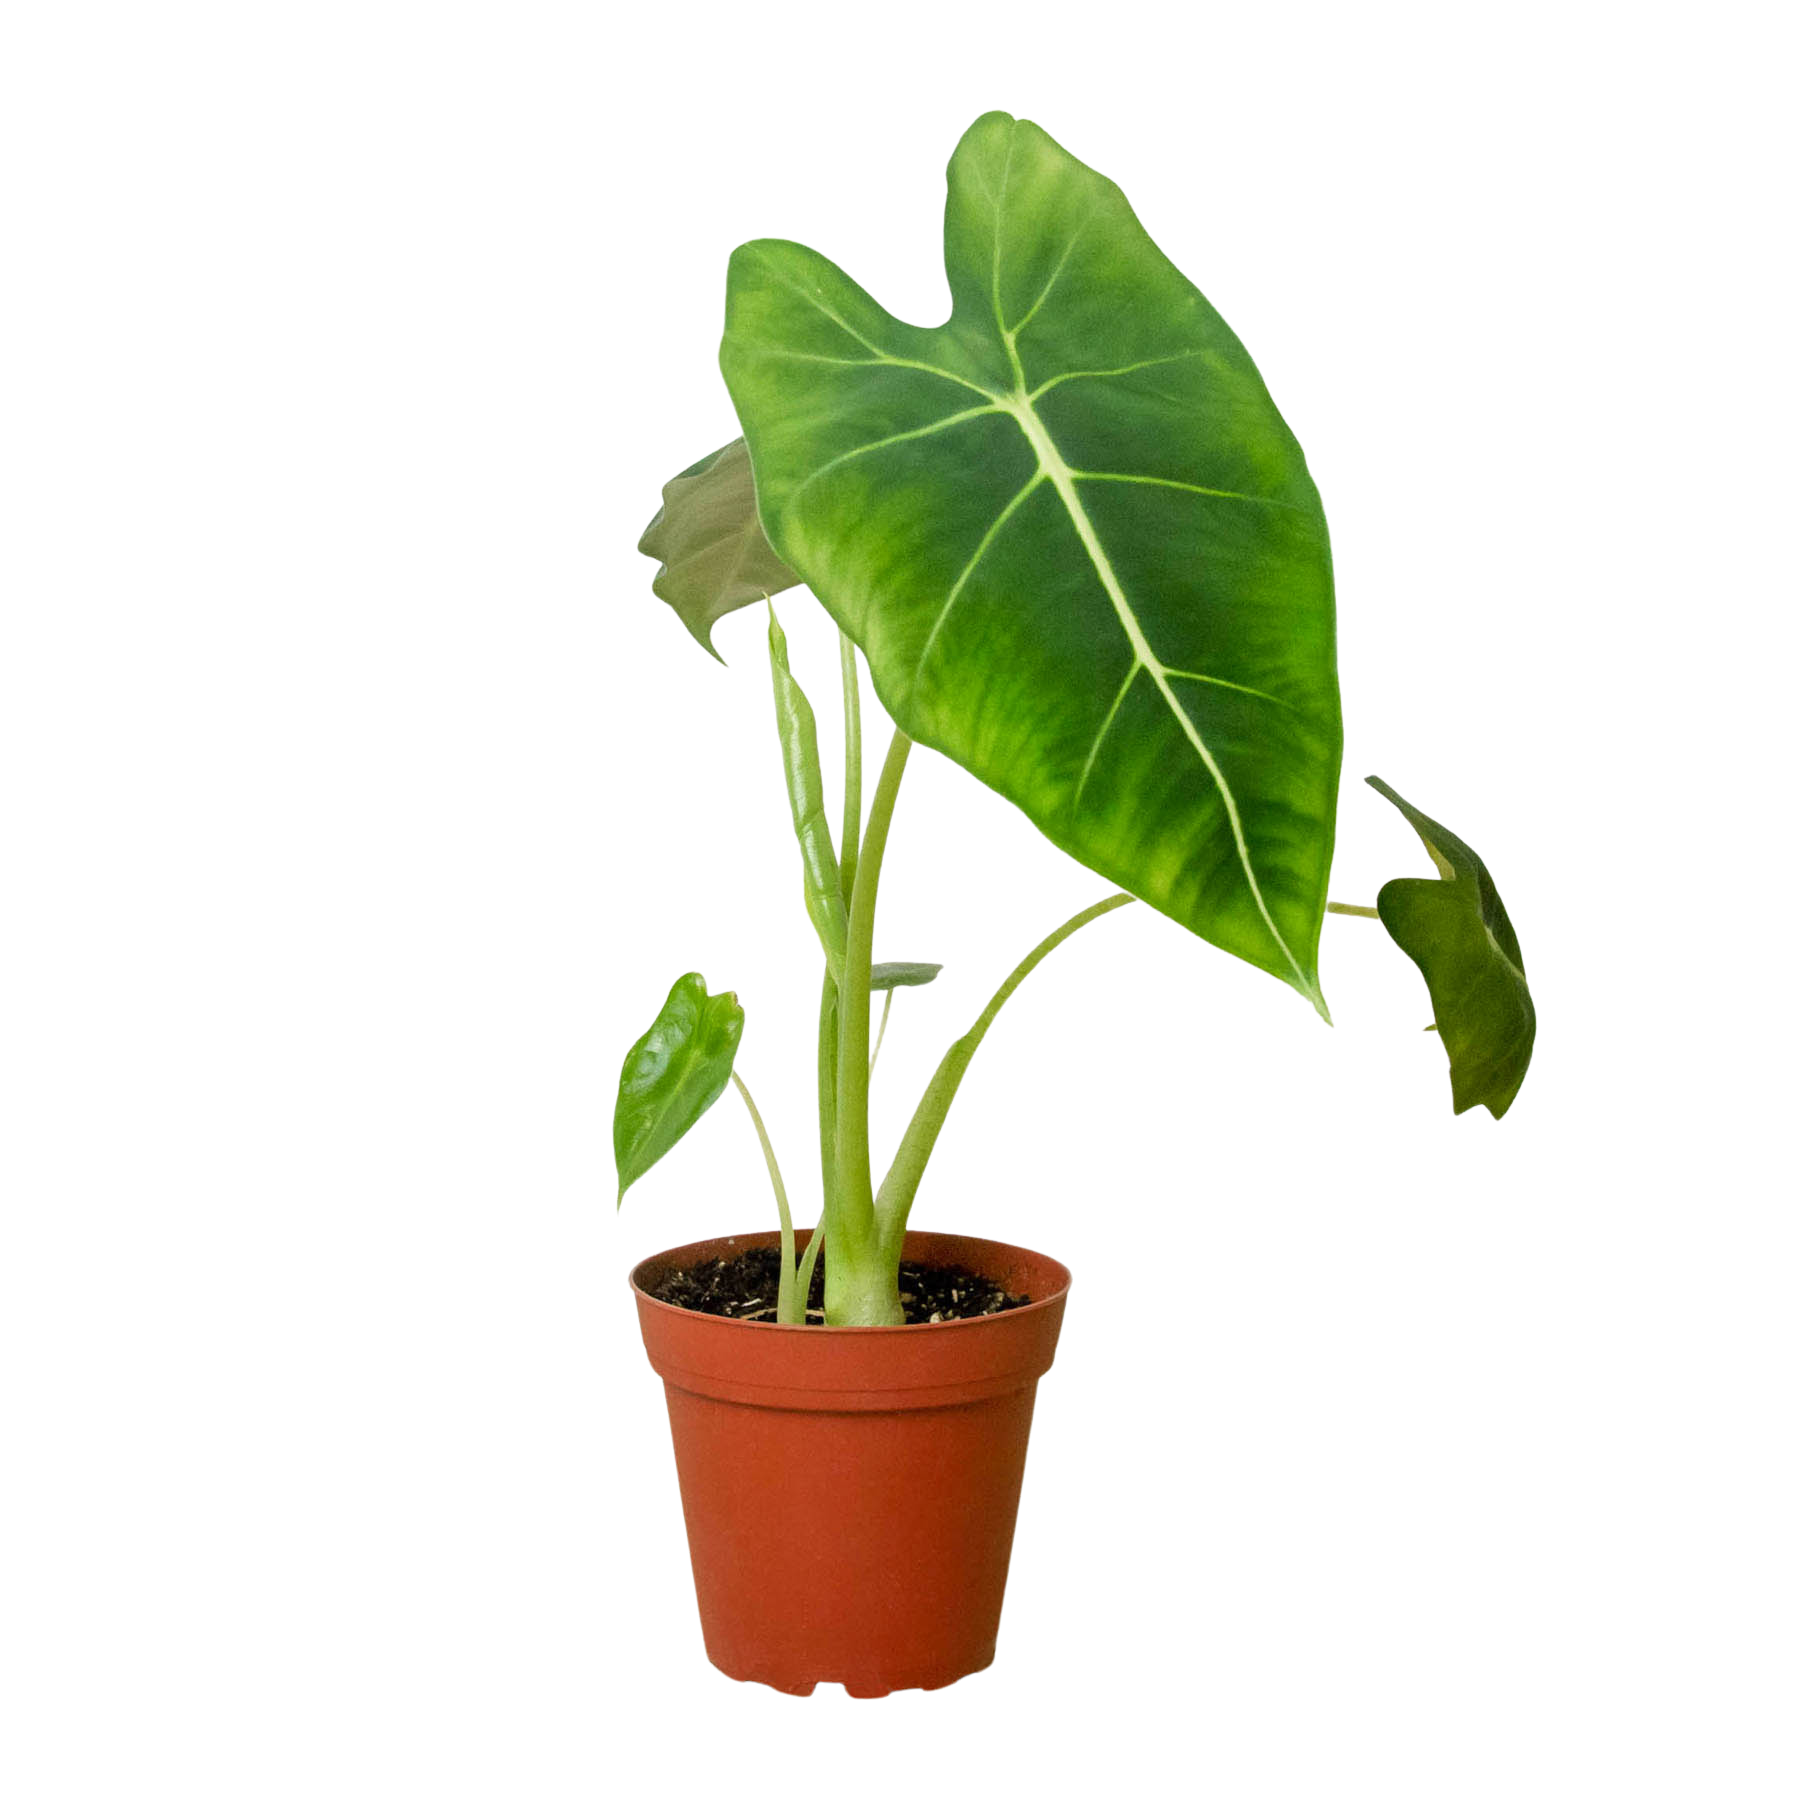 A large plant in a pot on a white background, perfect for the best garden center near me.